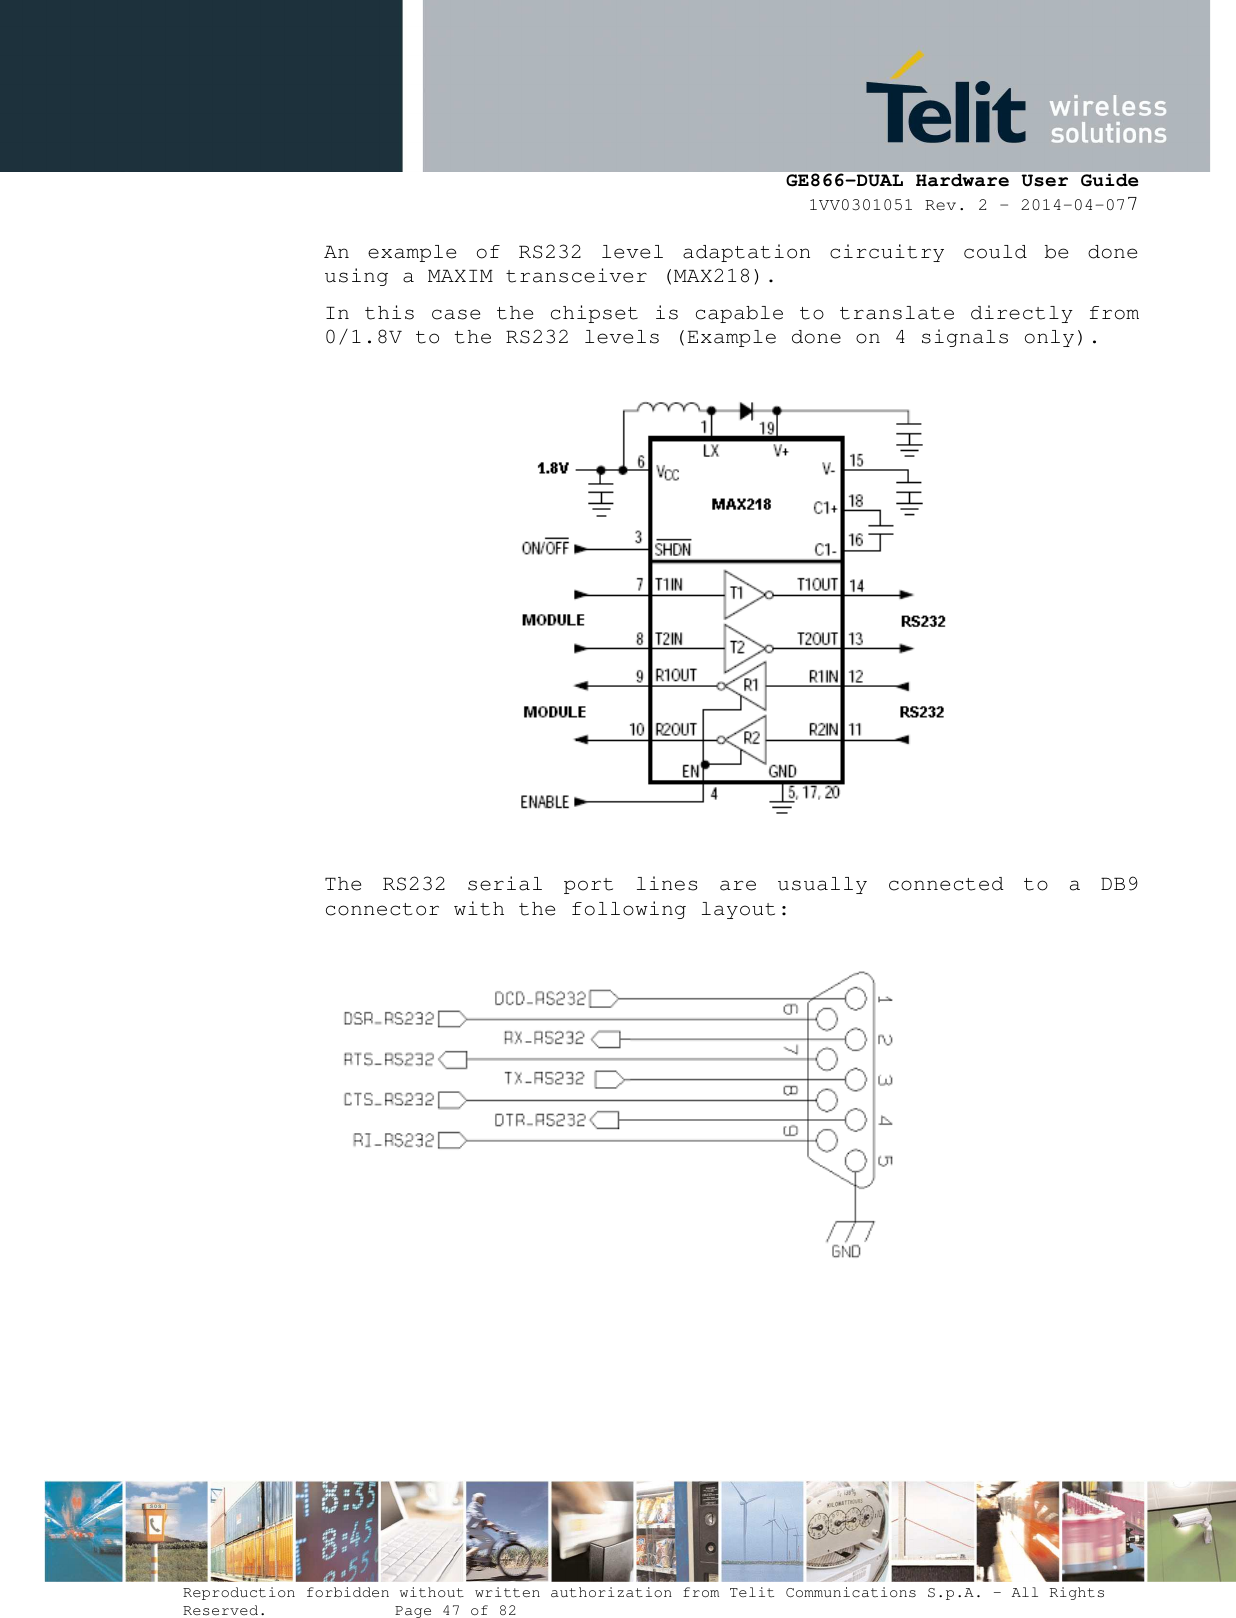      GE866-DUAL Hardware User Guide 1VV0301051 Rev. 2 – 2014-04-077  Reproduction forbidden without written authorization from Telit Communications S.p.A. - All Rights Reserved.    Page 47 of 82 Mod. 0805 2011-07 Rev.2 An  example  of  RS232  level  adaptation  circuitry  could  be  done using a MAXIM transceiver (MAX218).  In this case the chipset is capable to translate directly from 0/1.8V to the RS232 levels (Example done on 4 signals only).    The  RS232  serial  port  lines  are  usually  connected  to  a  DB9 connector with the following layout:    